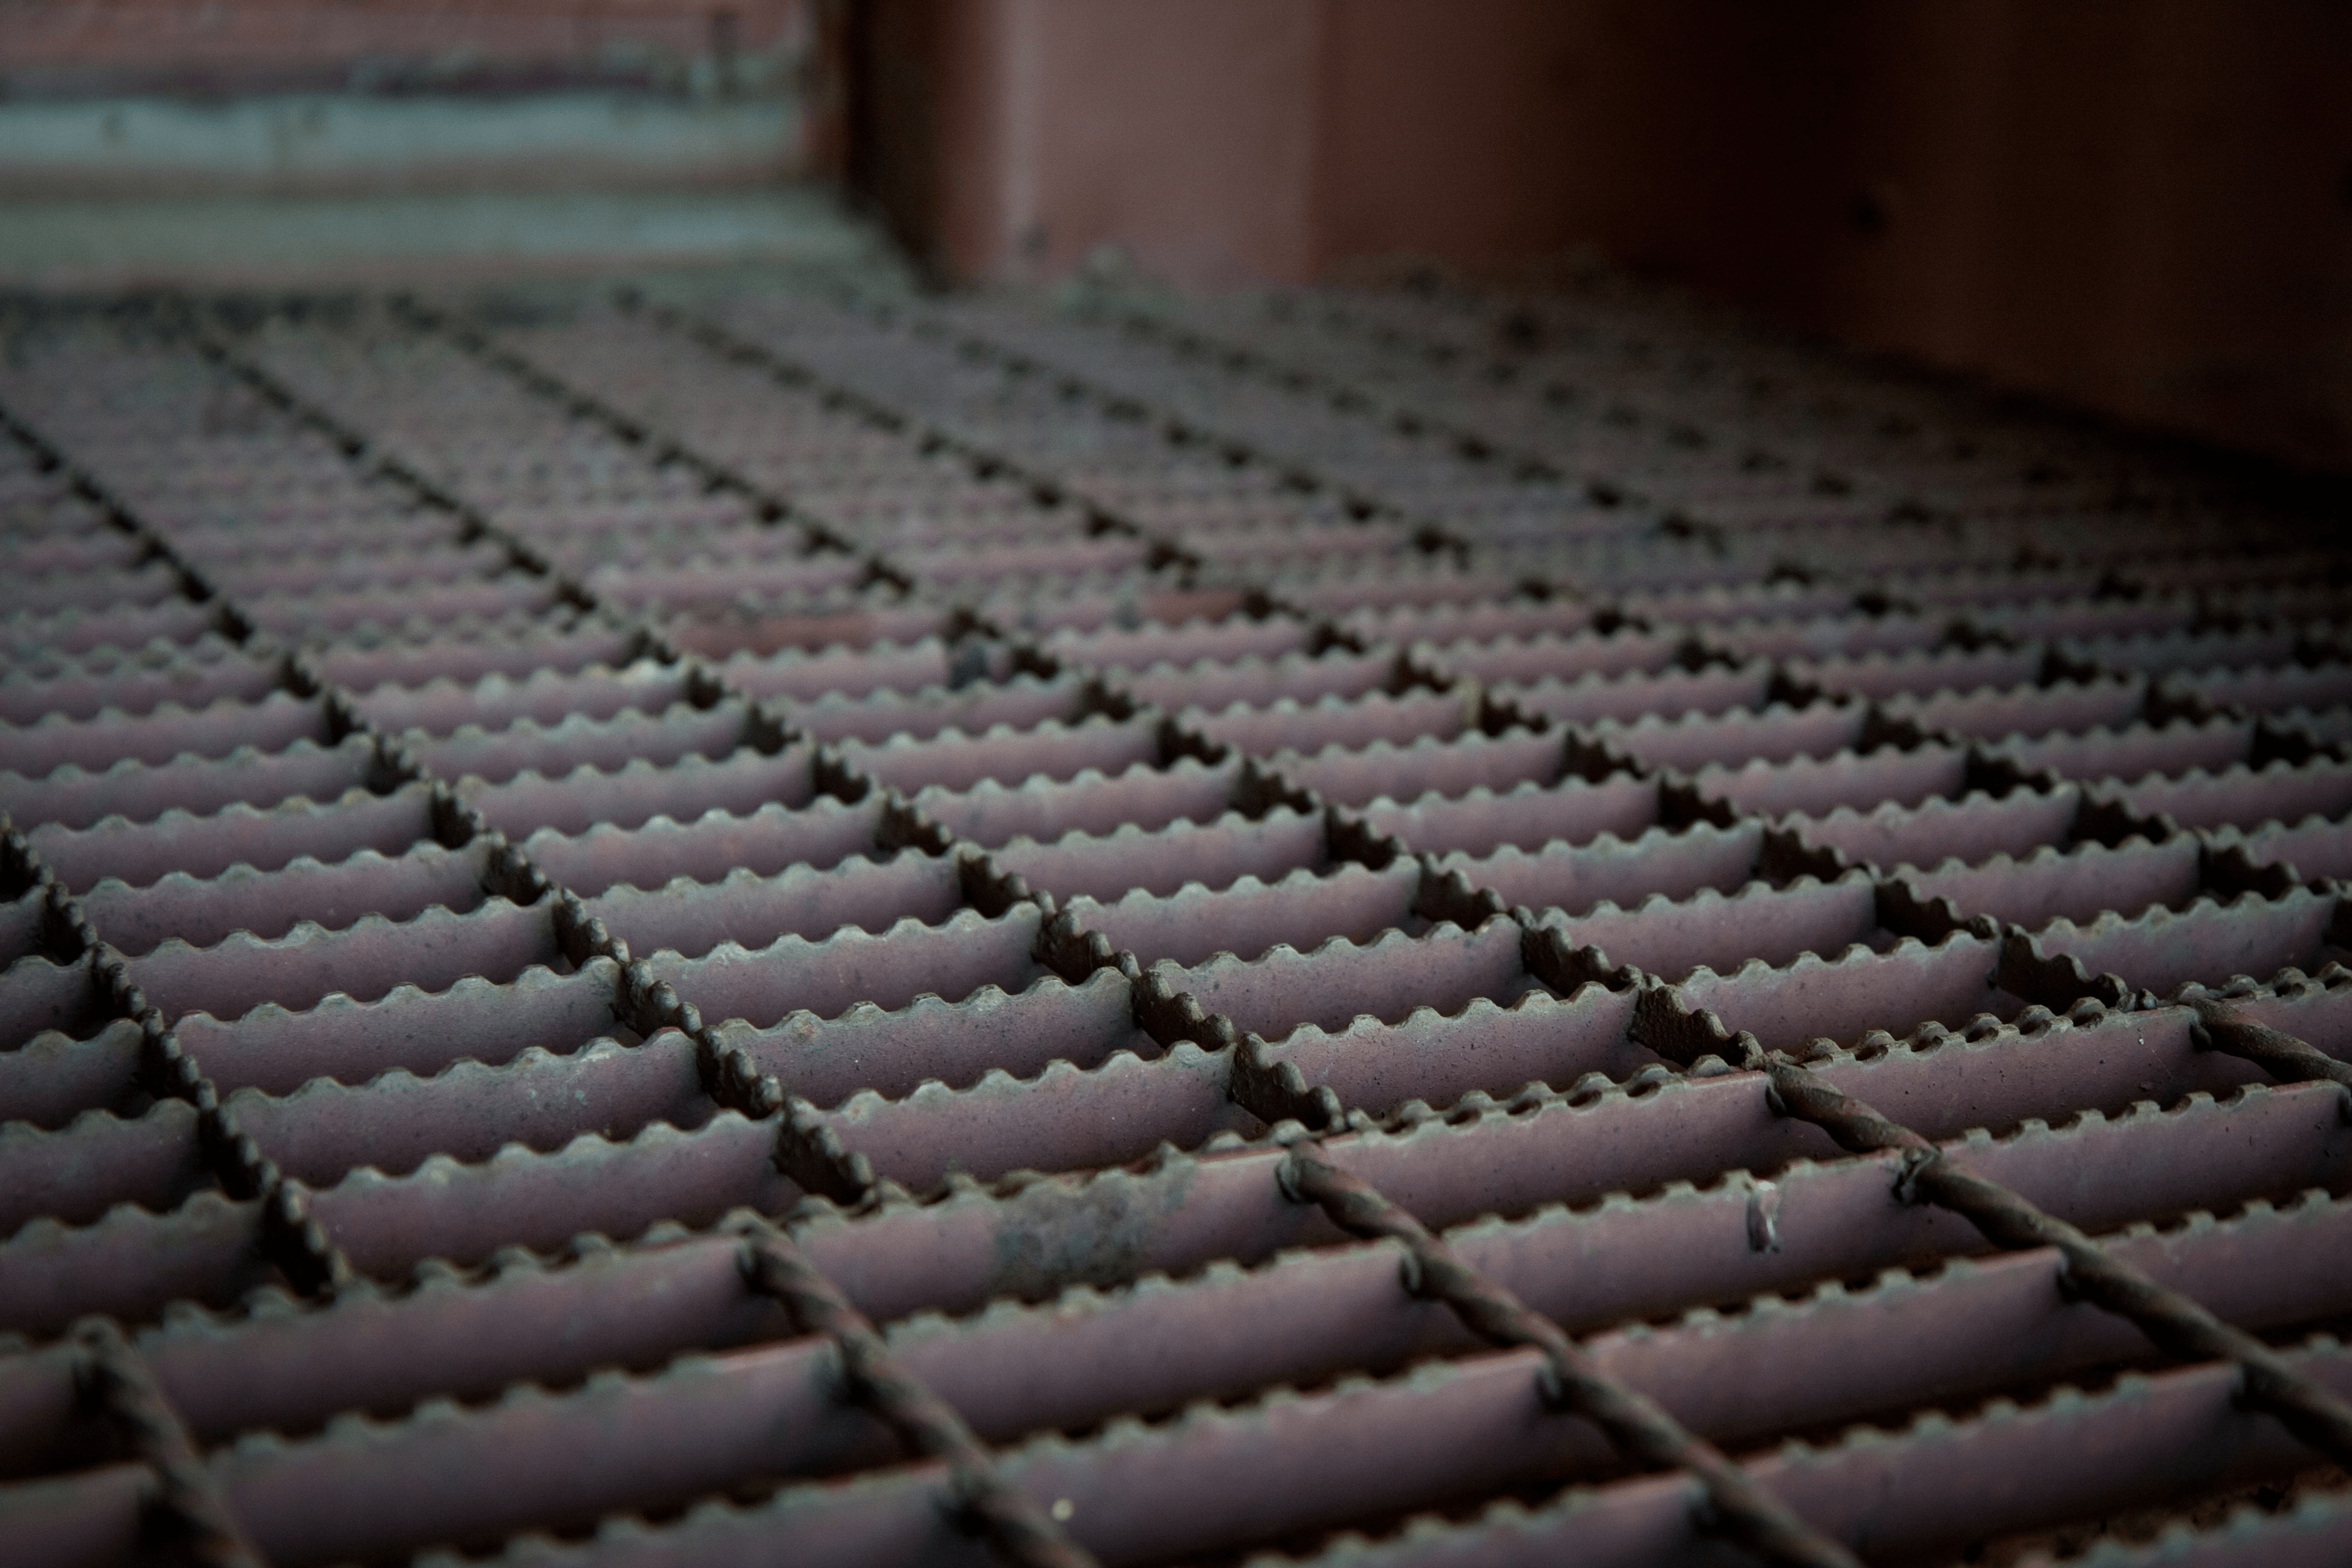 Serrated grating selection